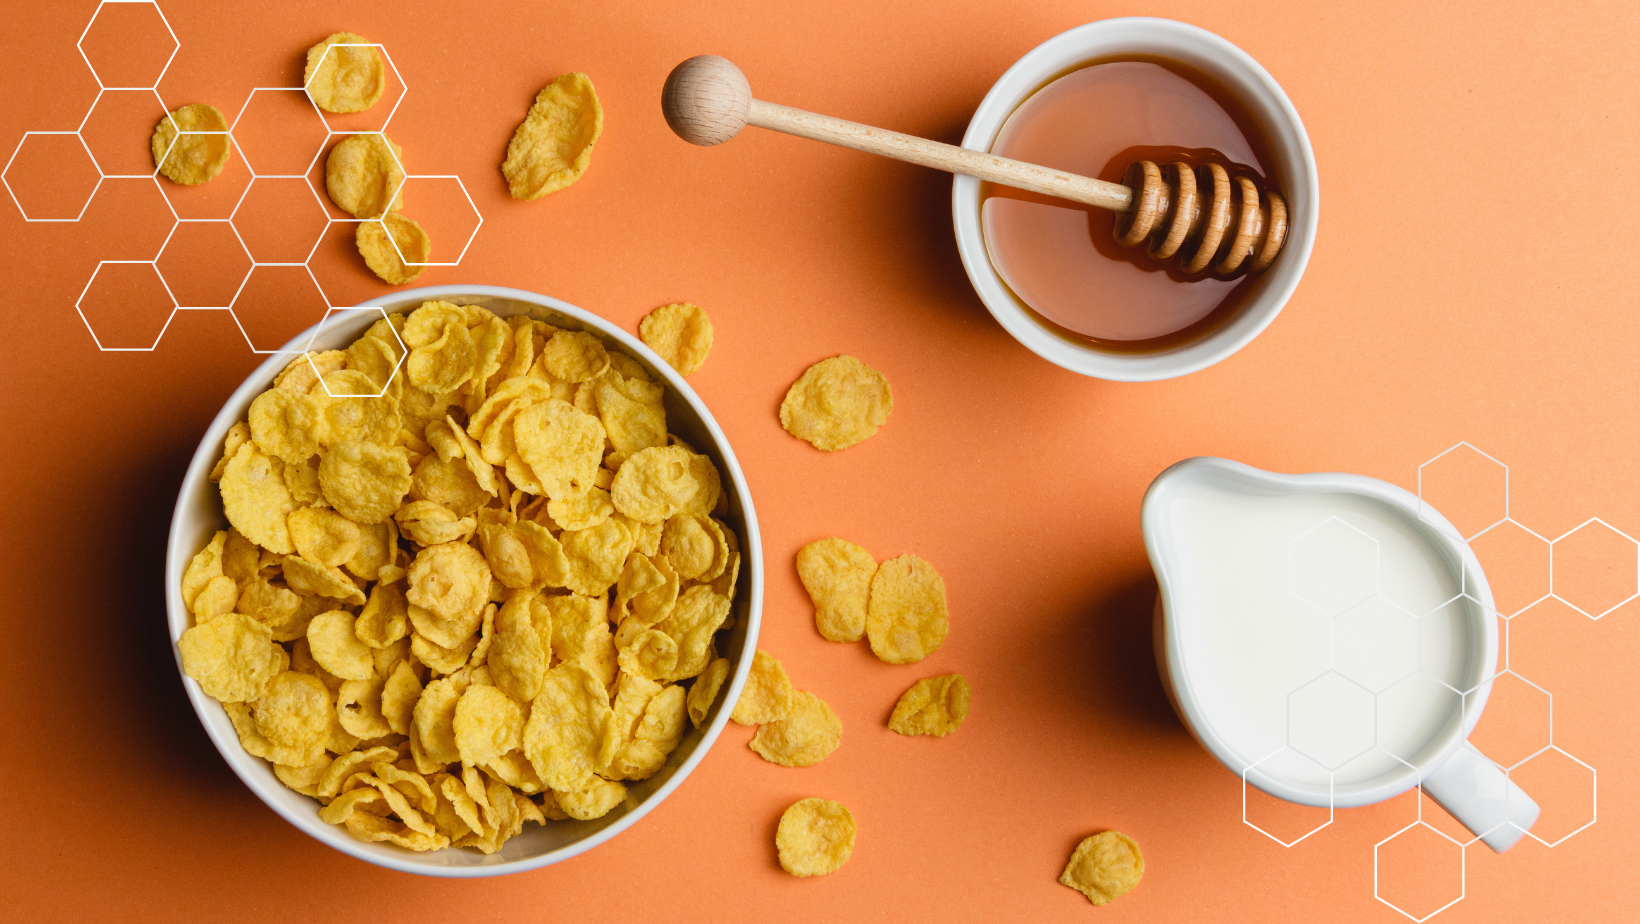 Looking down on an orange table top, into a bowl of flaked corn cereal, a small pitcher of cold white milk and a bowl of delicious honey. There decorations of honeycomb shapes overlaid in white on the upper left and lower right corners of the image.